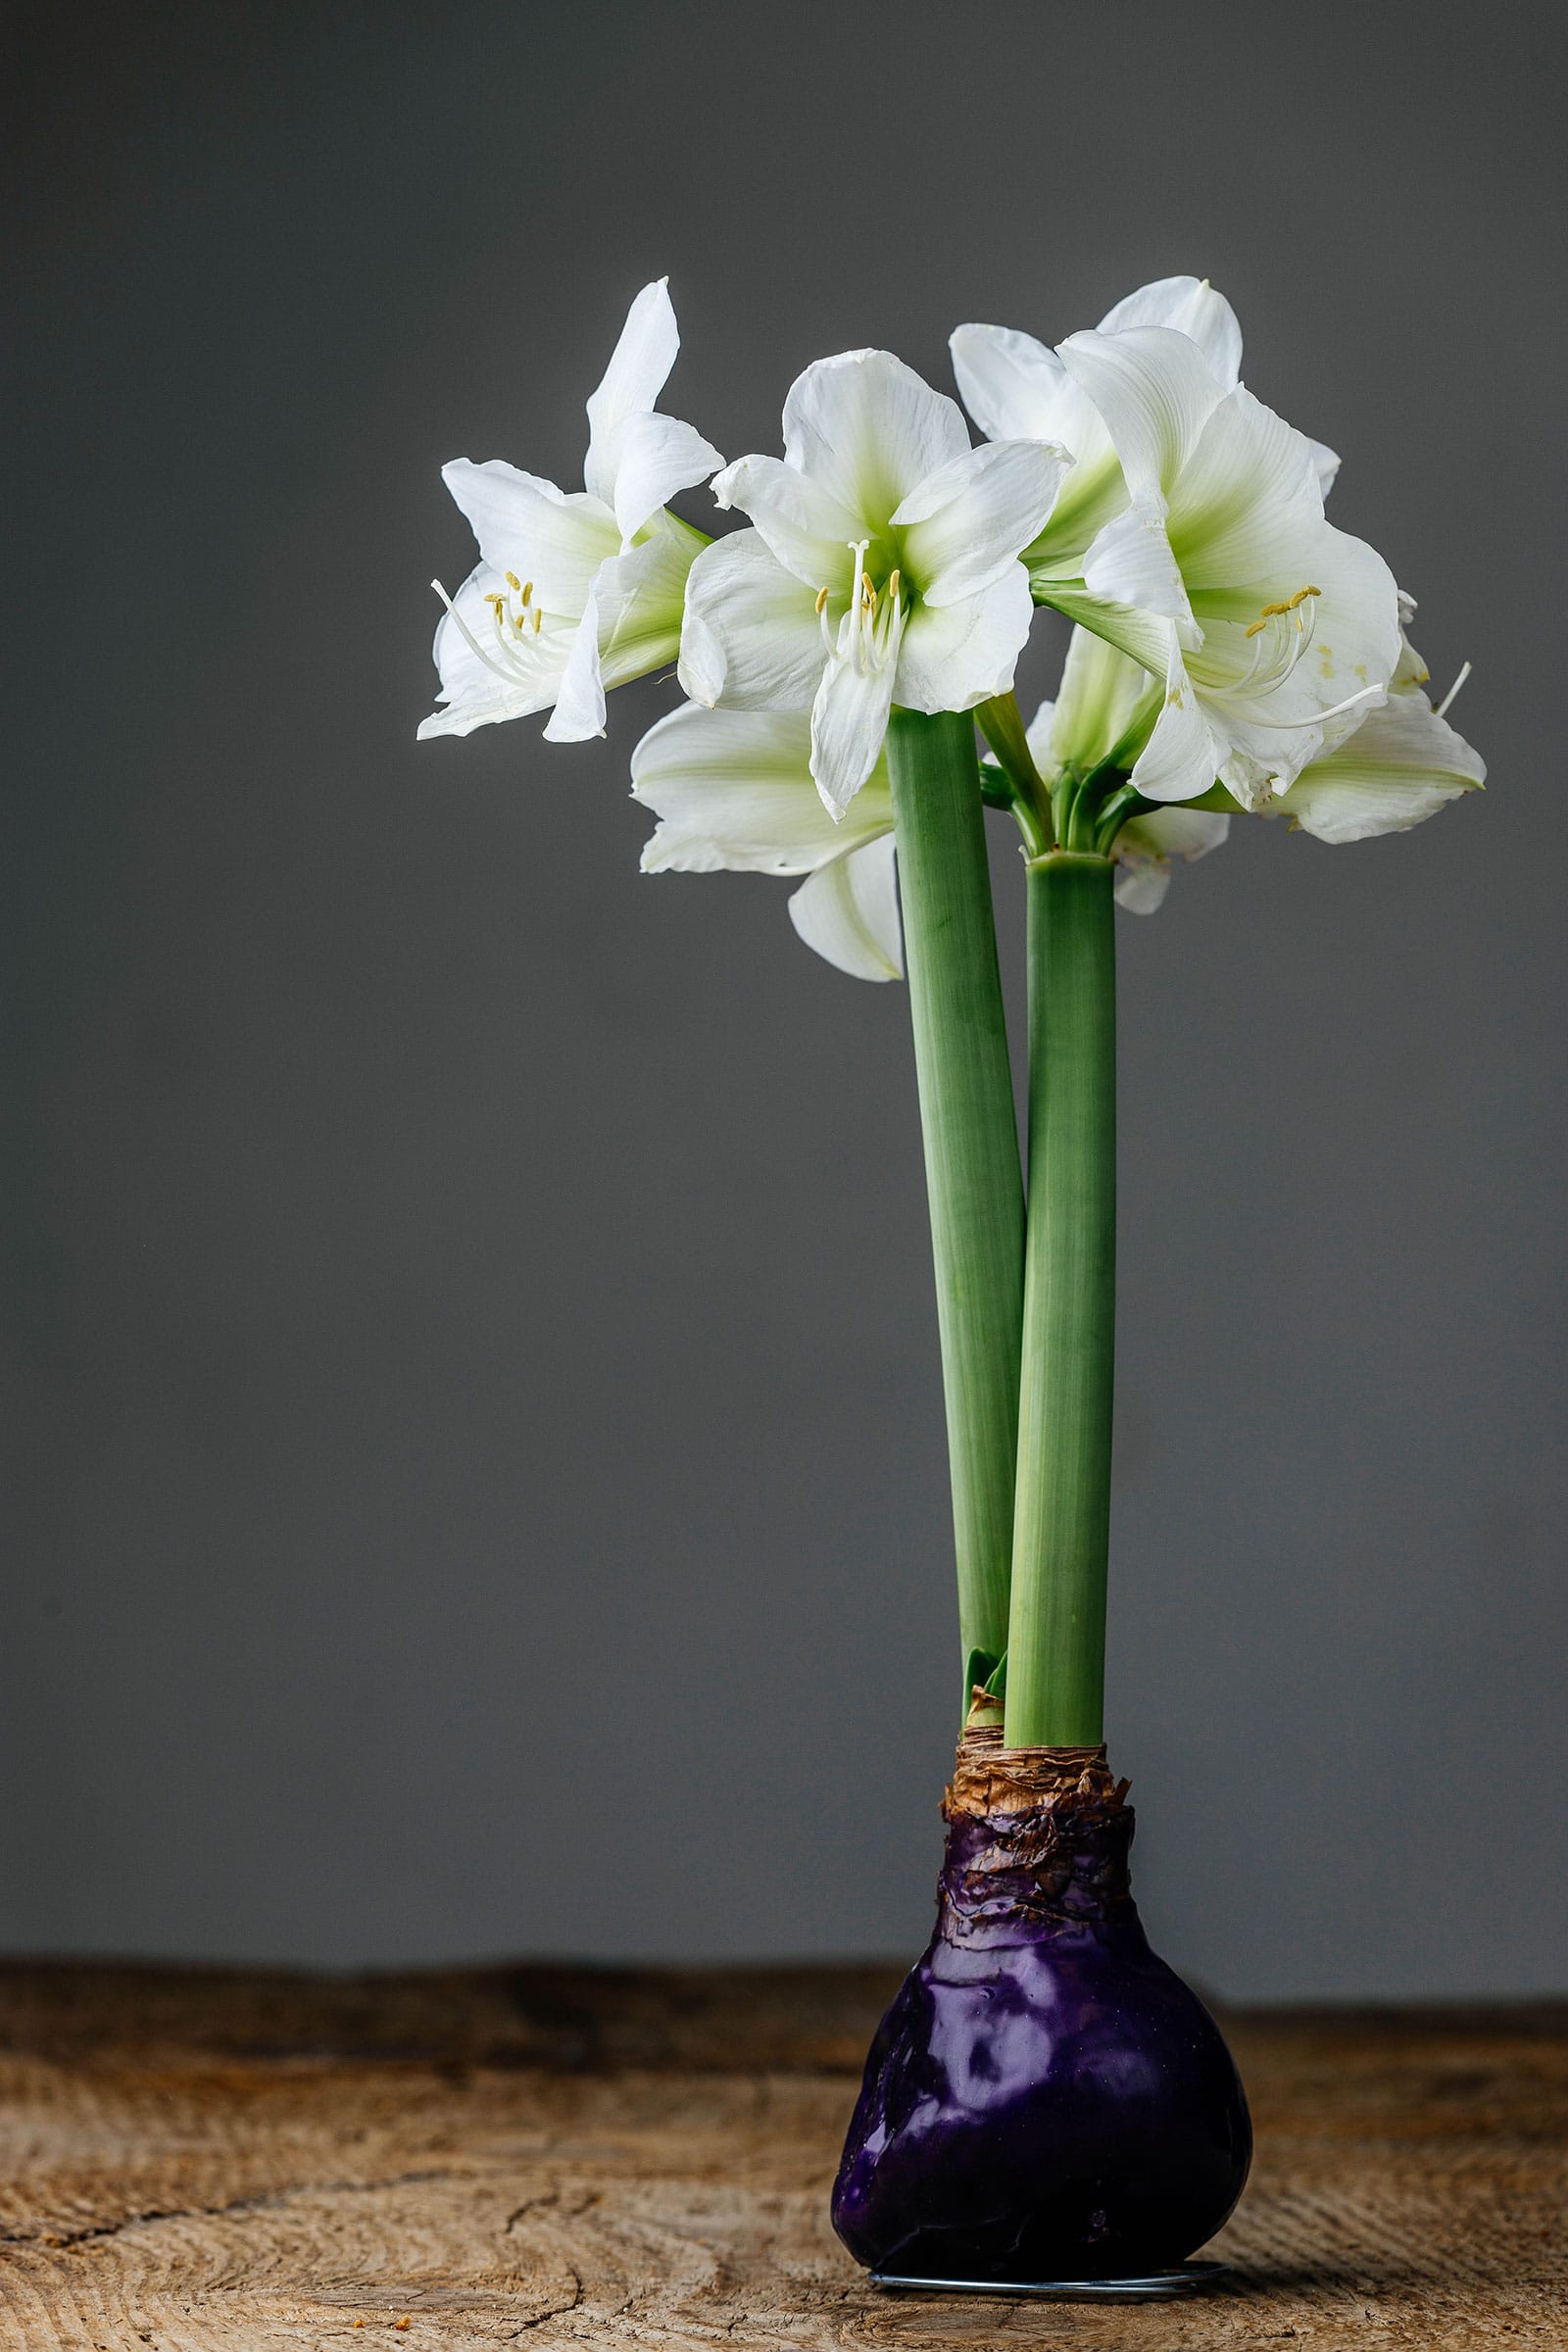 Waxed amaryllis bulb with white blooms on stout stems